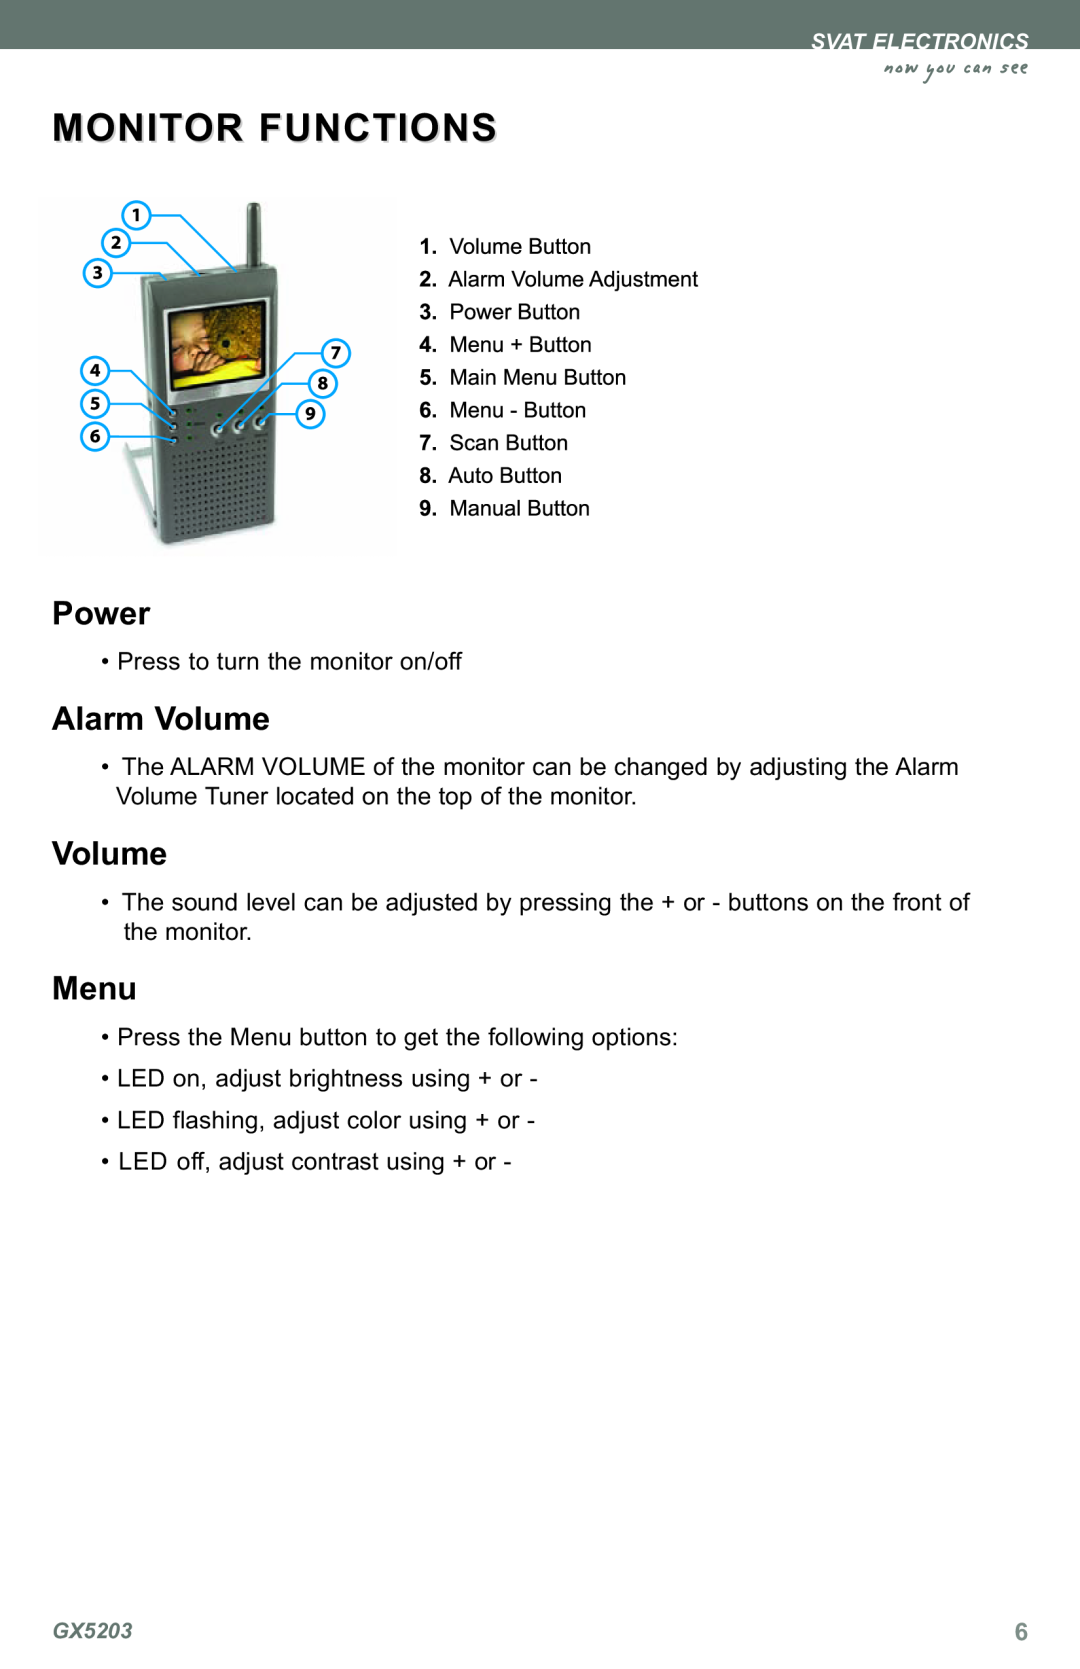 SVAT Electronics GX5203 instruction manual Monitor Functions, Power, Alarm Volume, Menu, now you can see 